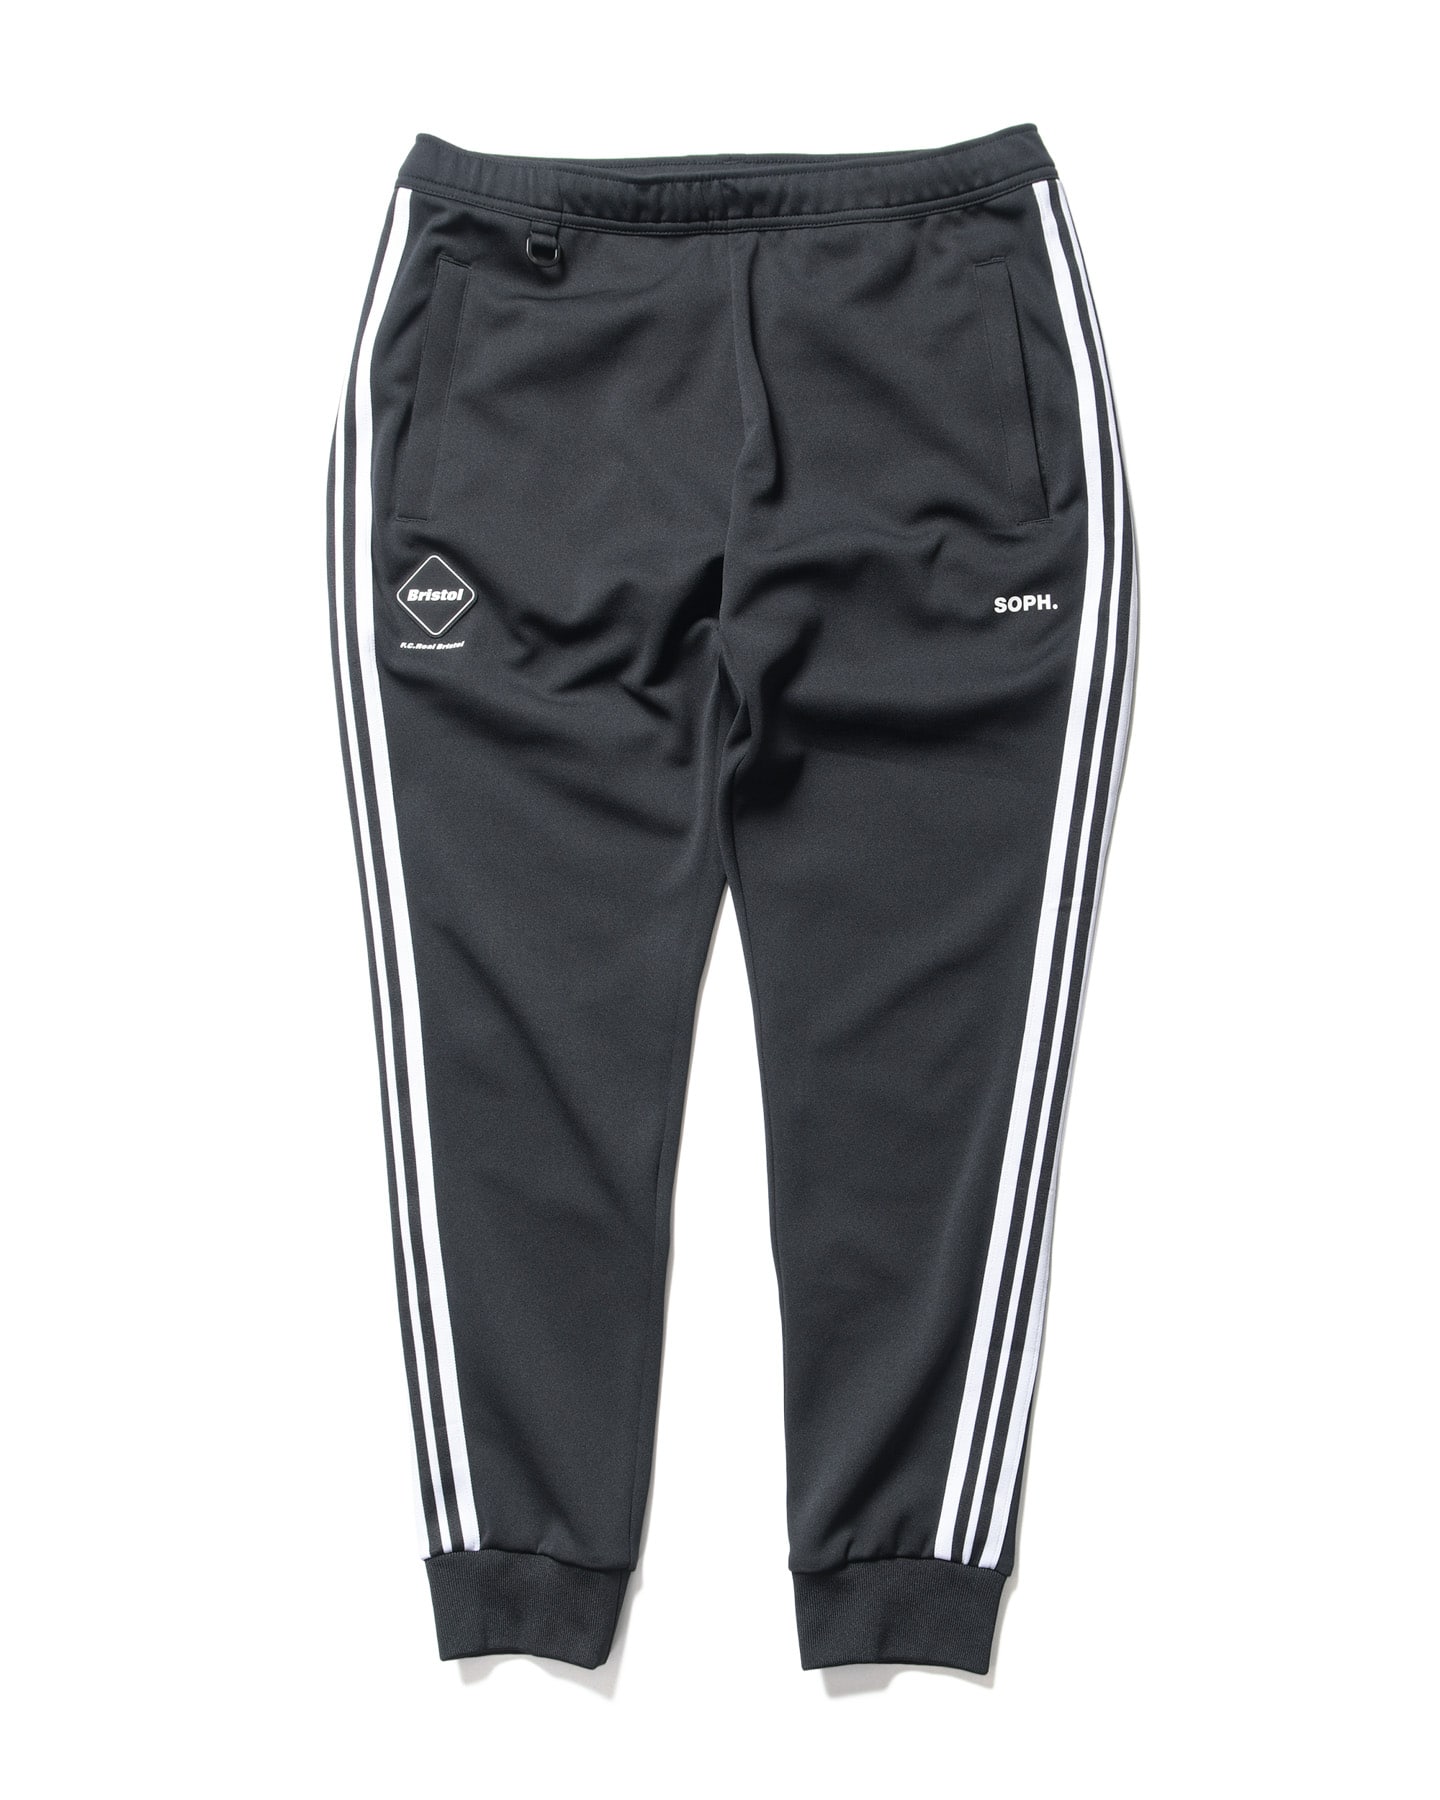 Real Essentials 3 Pack: Men's Tricot Active Athletic Casual Jogger